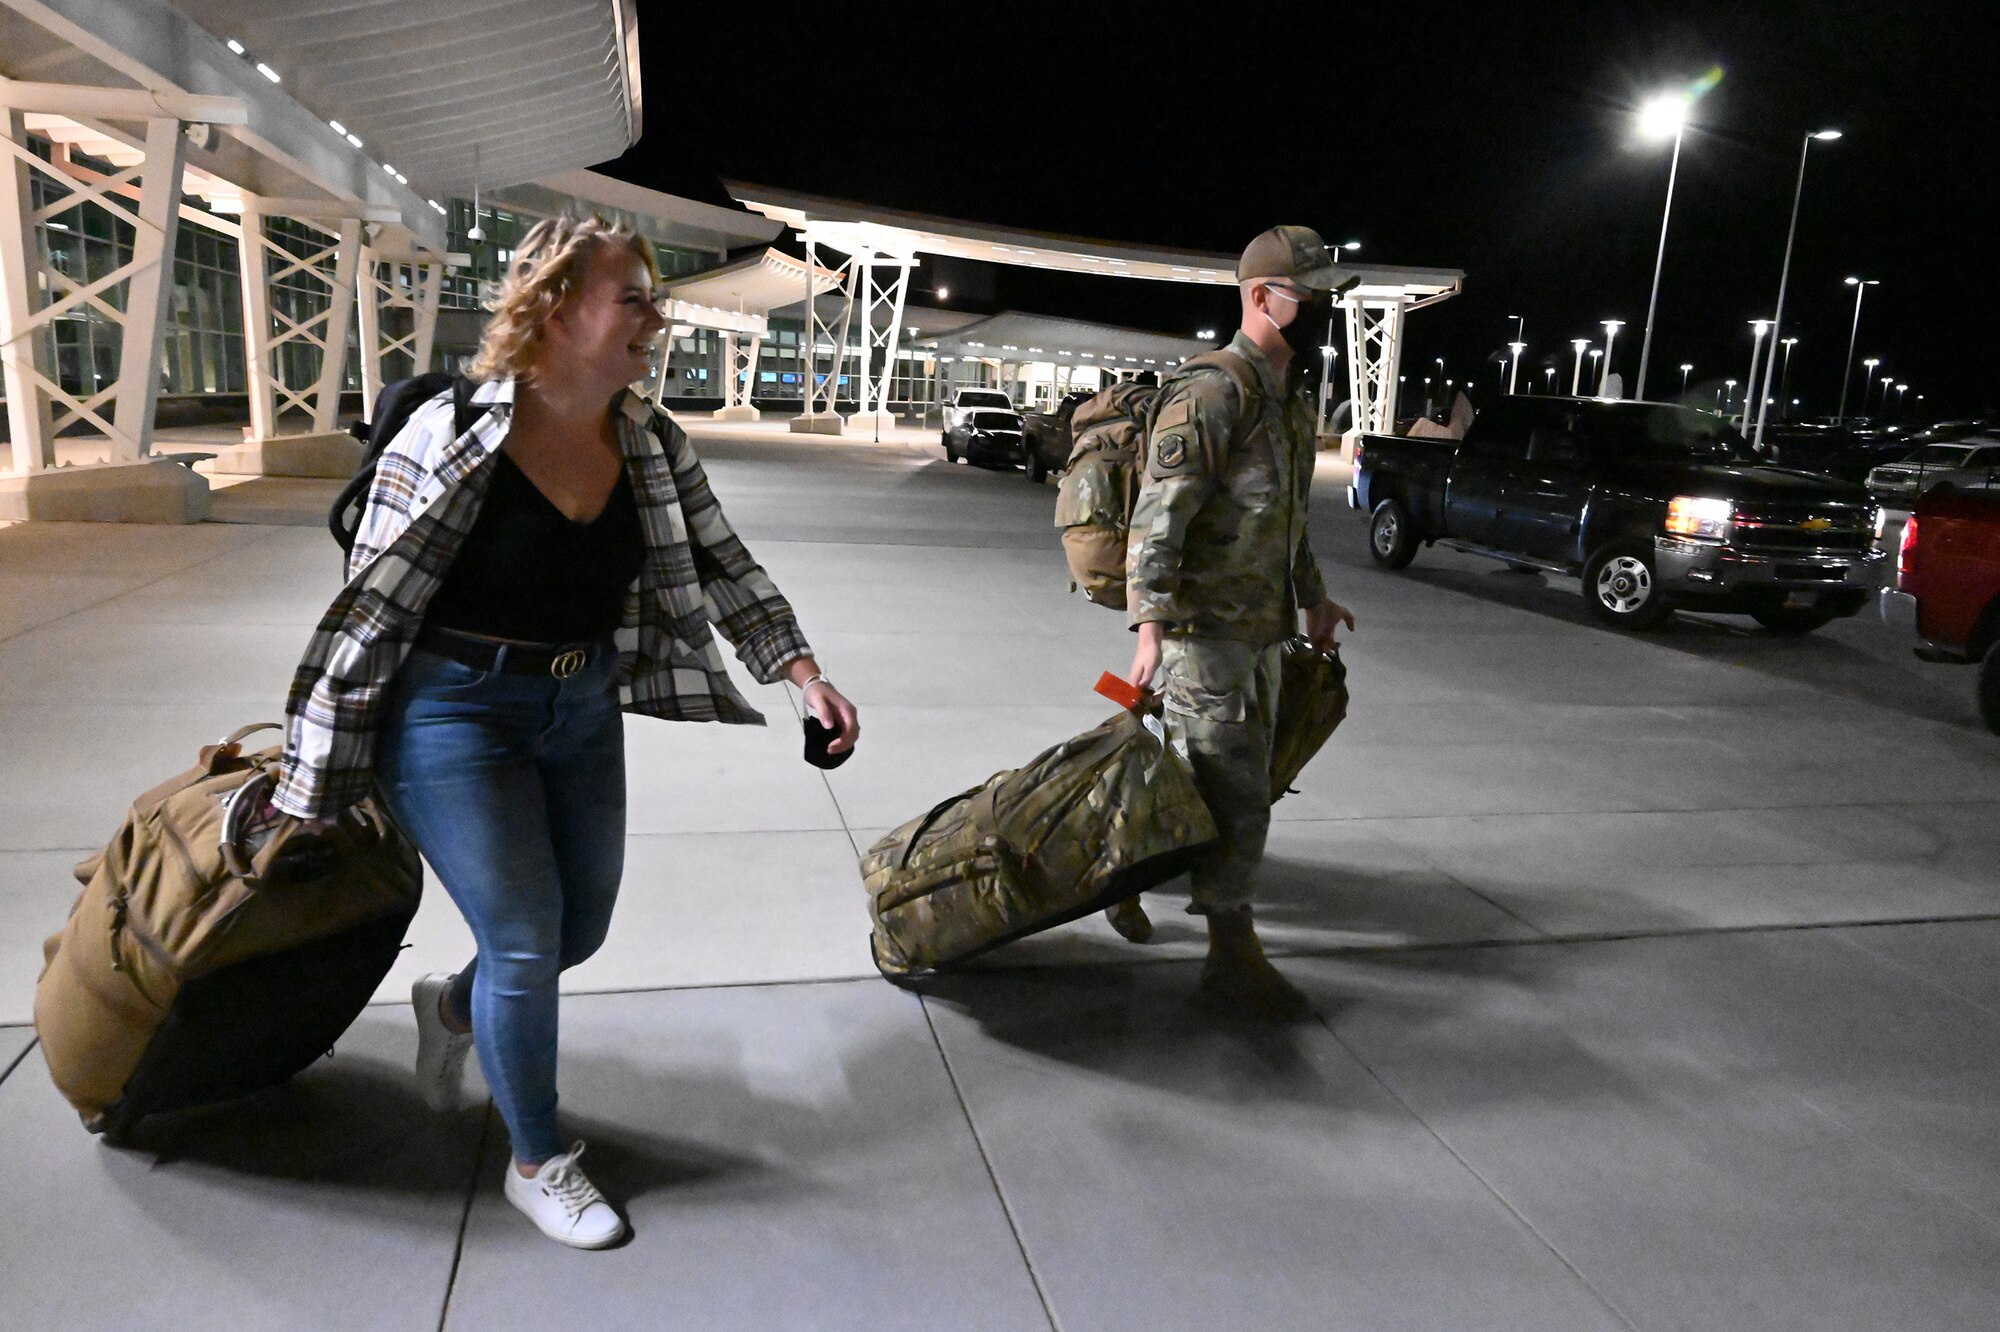 Two military member in uniform pick up their travel luggage from baggage claim at the Minot International Airport, Minot, N.D., Nov. 4, 2021.